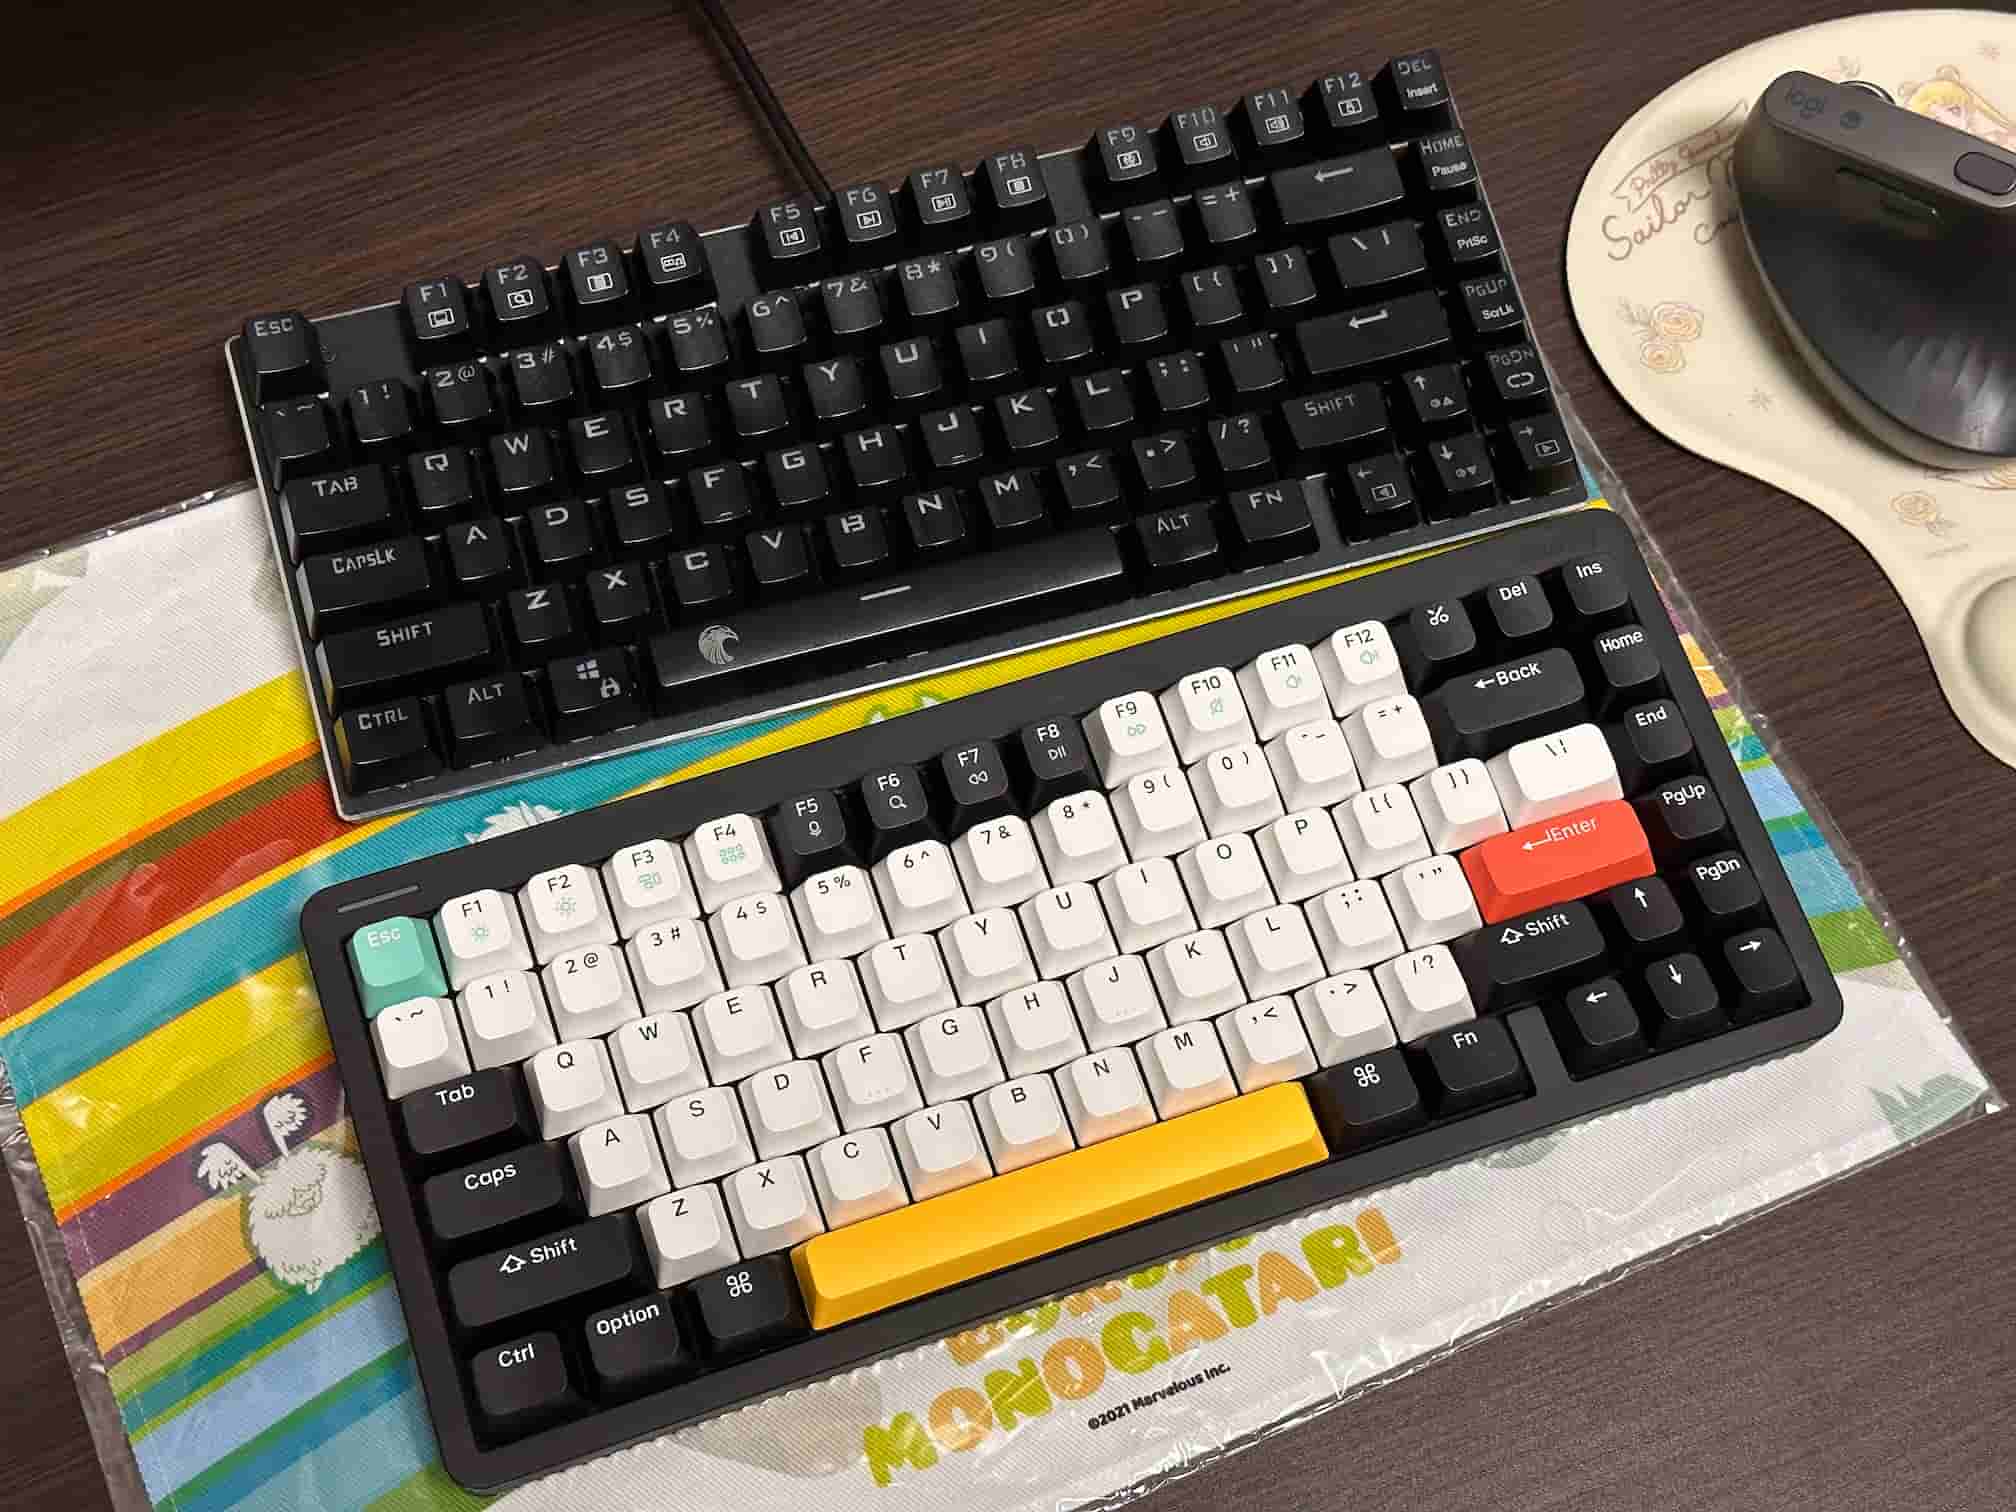 A side-by-side comparison of two mechanical keyboards, with the E-Yooso Z-88 on top featuring all black keycaps, and the NuPhy Halo75 on the bottom with white, black, gray, and colorful keycaps including a standout red Enter key